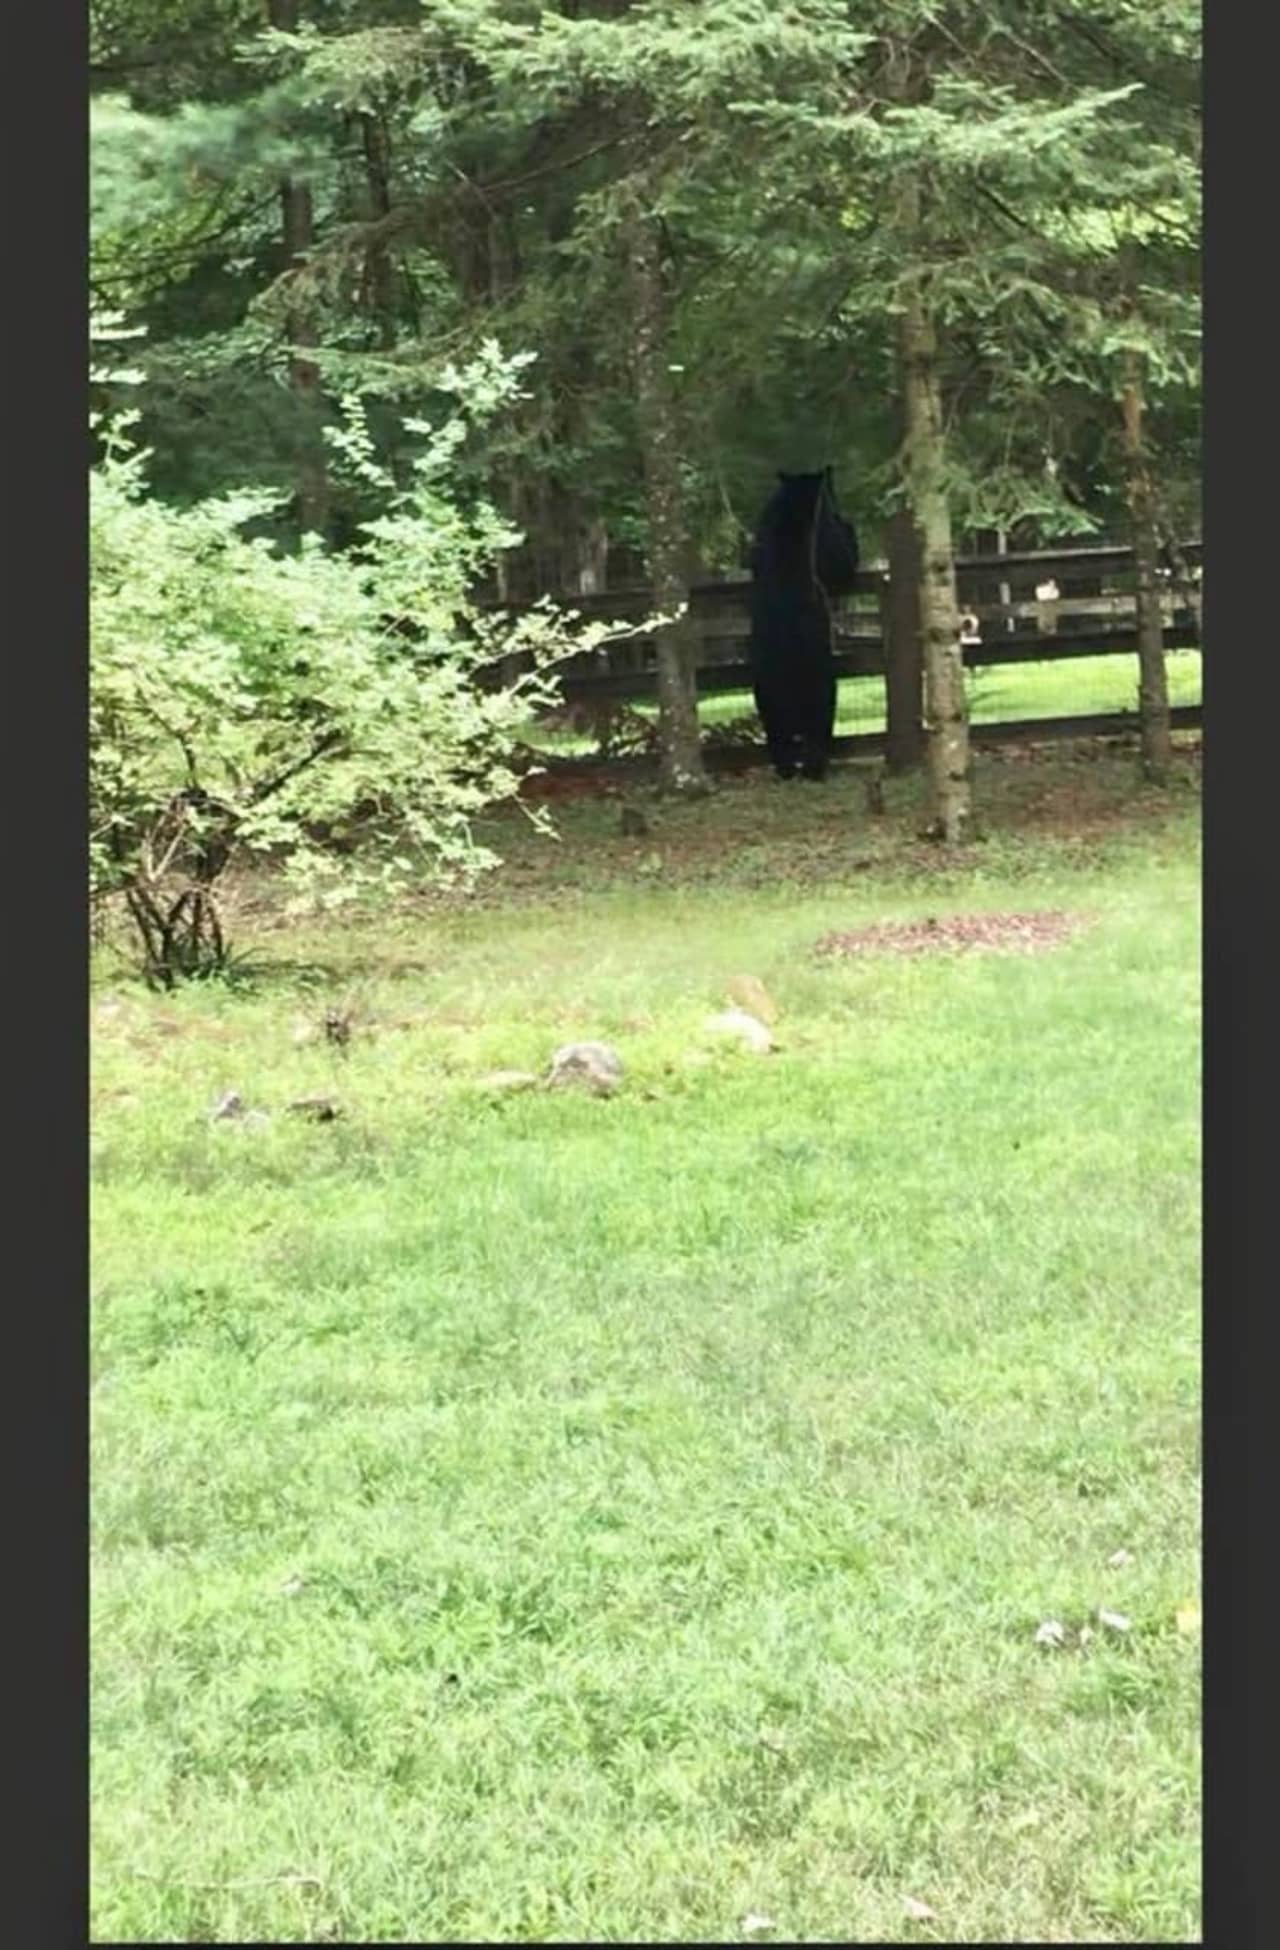 A black bear was spotted peeking over a fence in Ramapo.